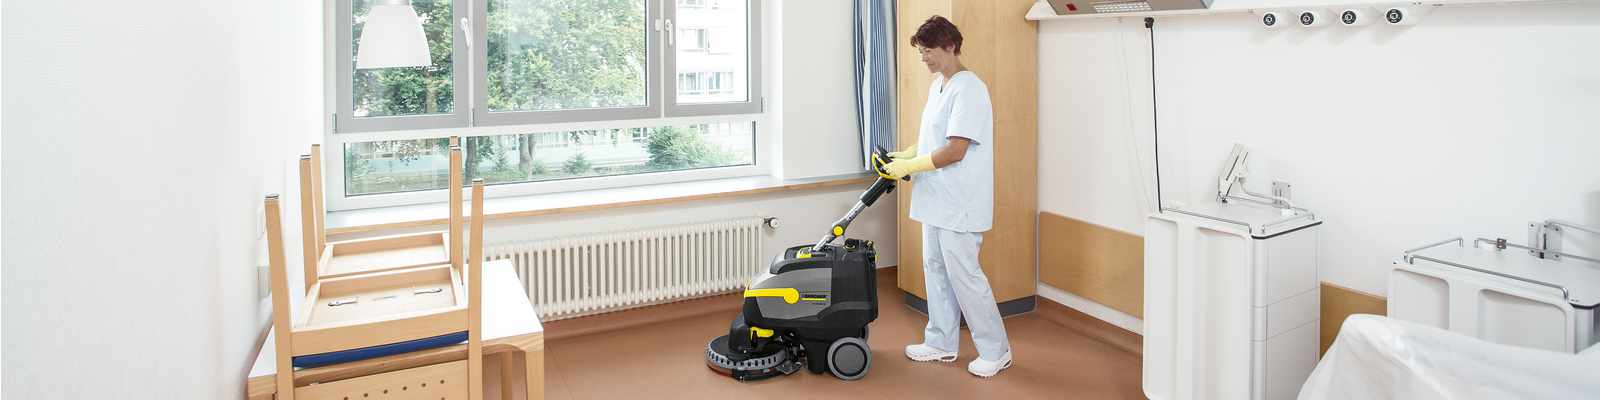 Scrubber dryer cleaning a hospital floor